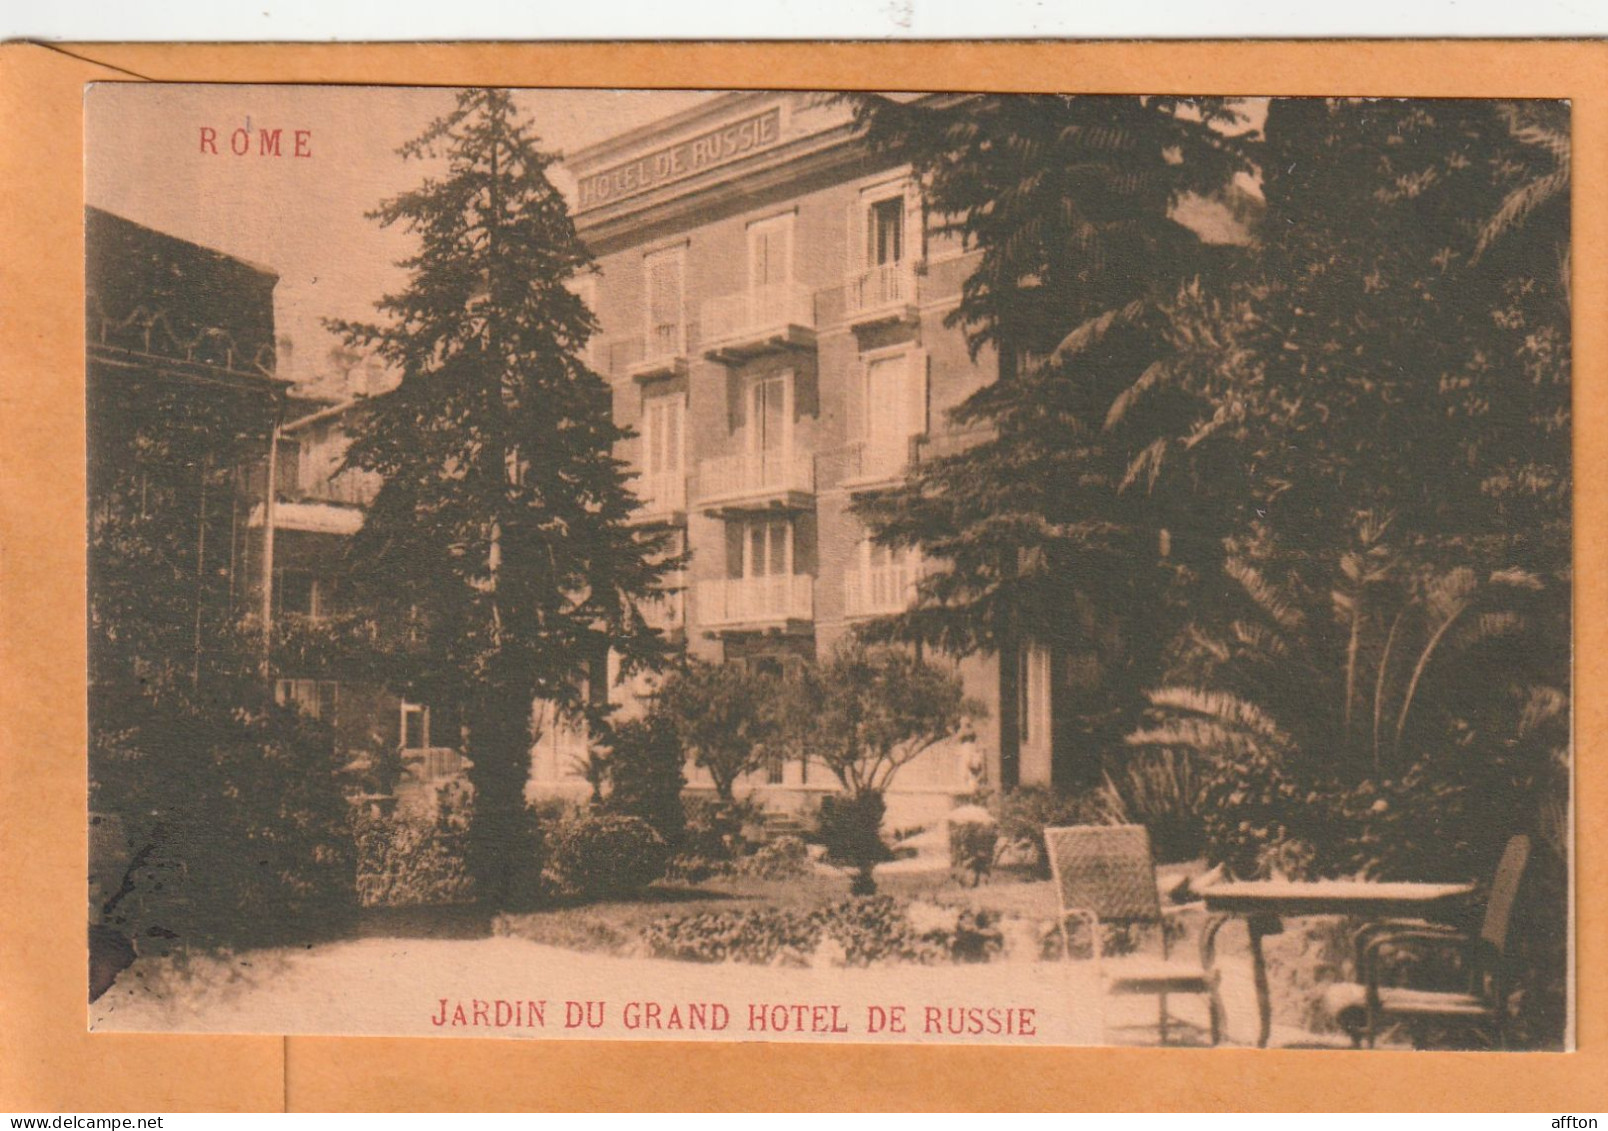 Rome Grand Hotel De Russie Italy 1905 Postcard - Cafes, Hotels & Restaurants